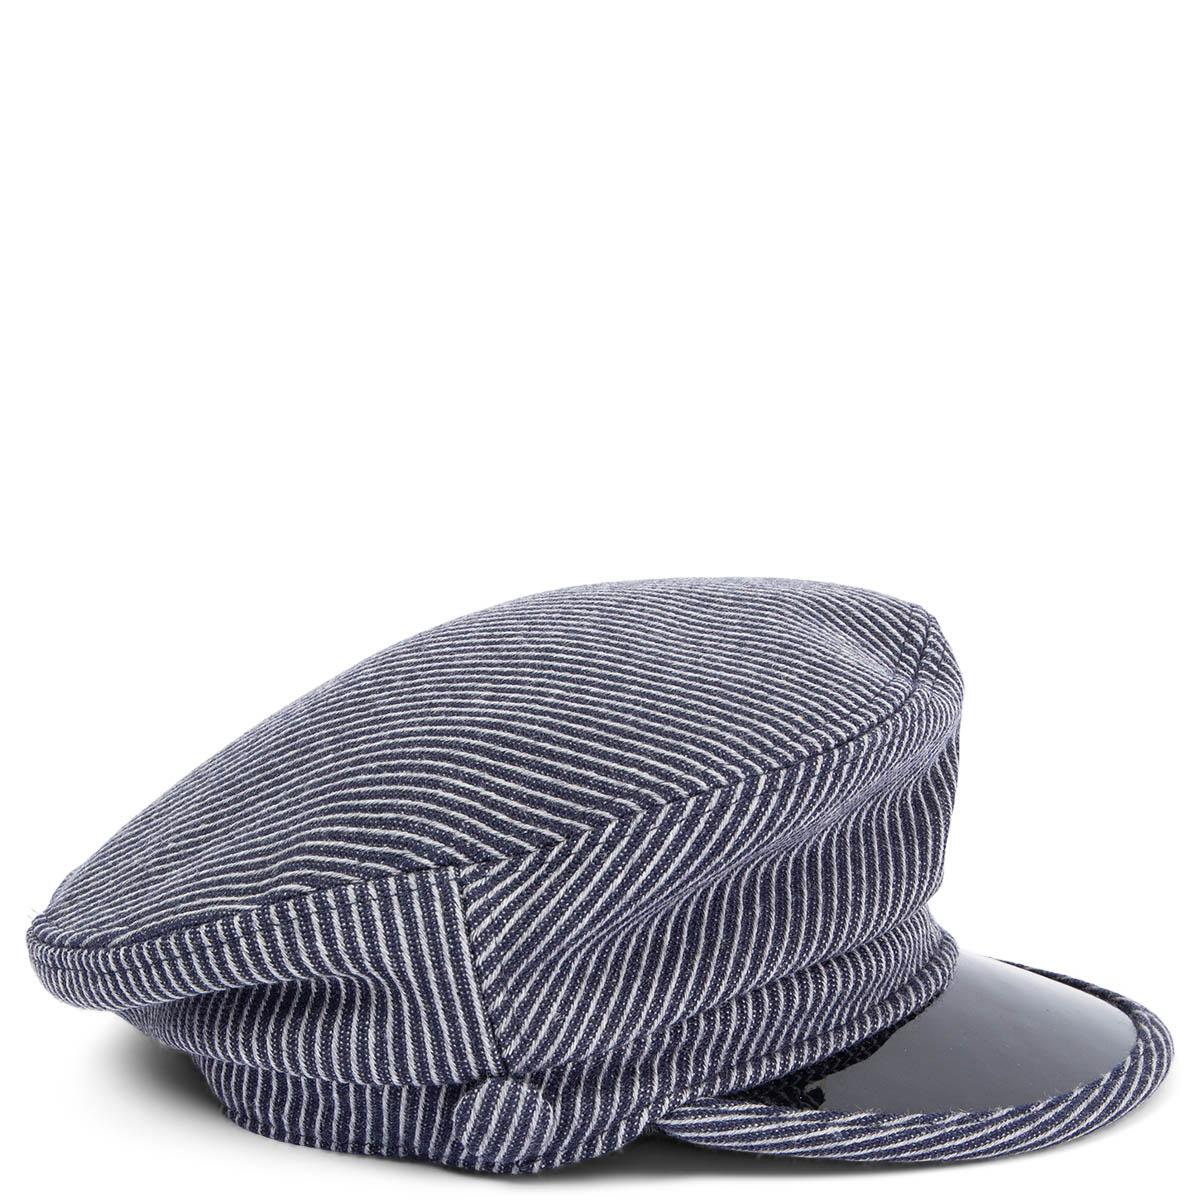 100% authentic Chanel 2018 Métiers d'Art Hamburg Collection striped sailor hat in navy and gray wool (70%) and black PVC cap (30%). Lined in black quilted cotton (50%), polyamide (27%) and polyester (23%) with grosgrain trim. Has been worn and is in